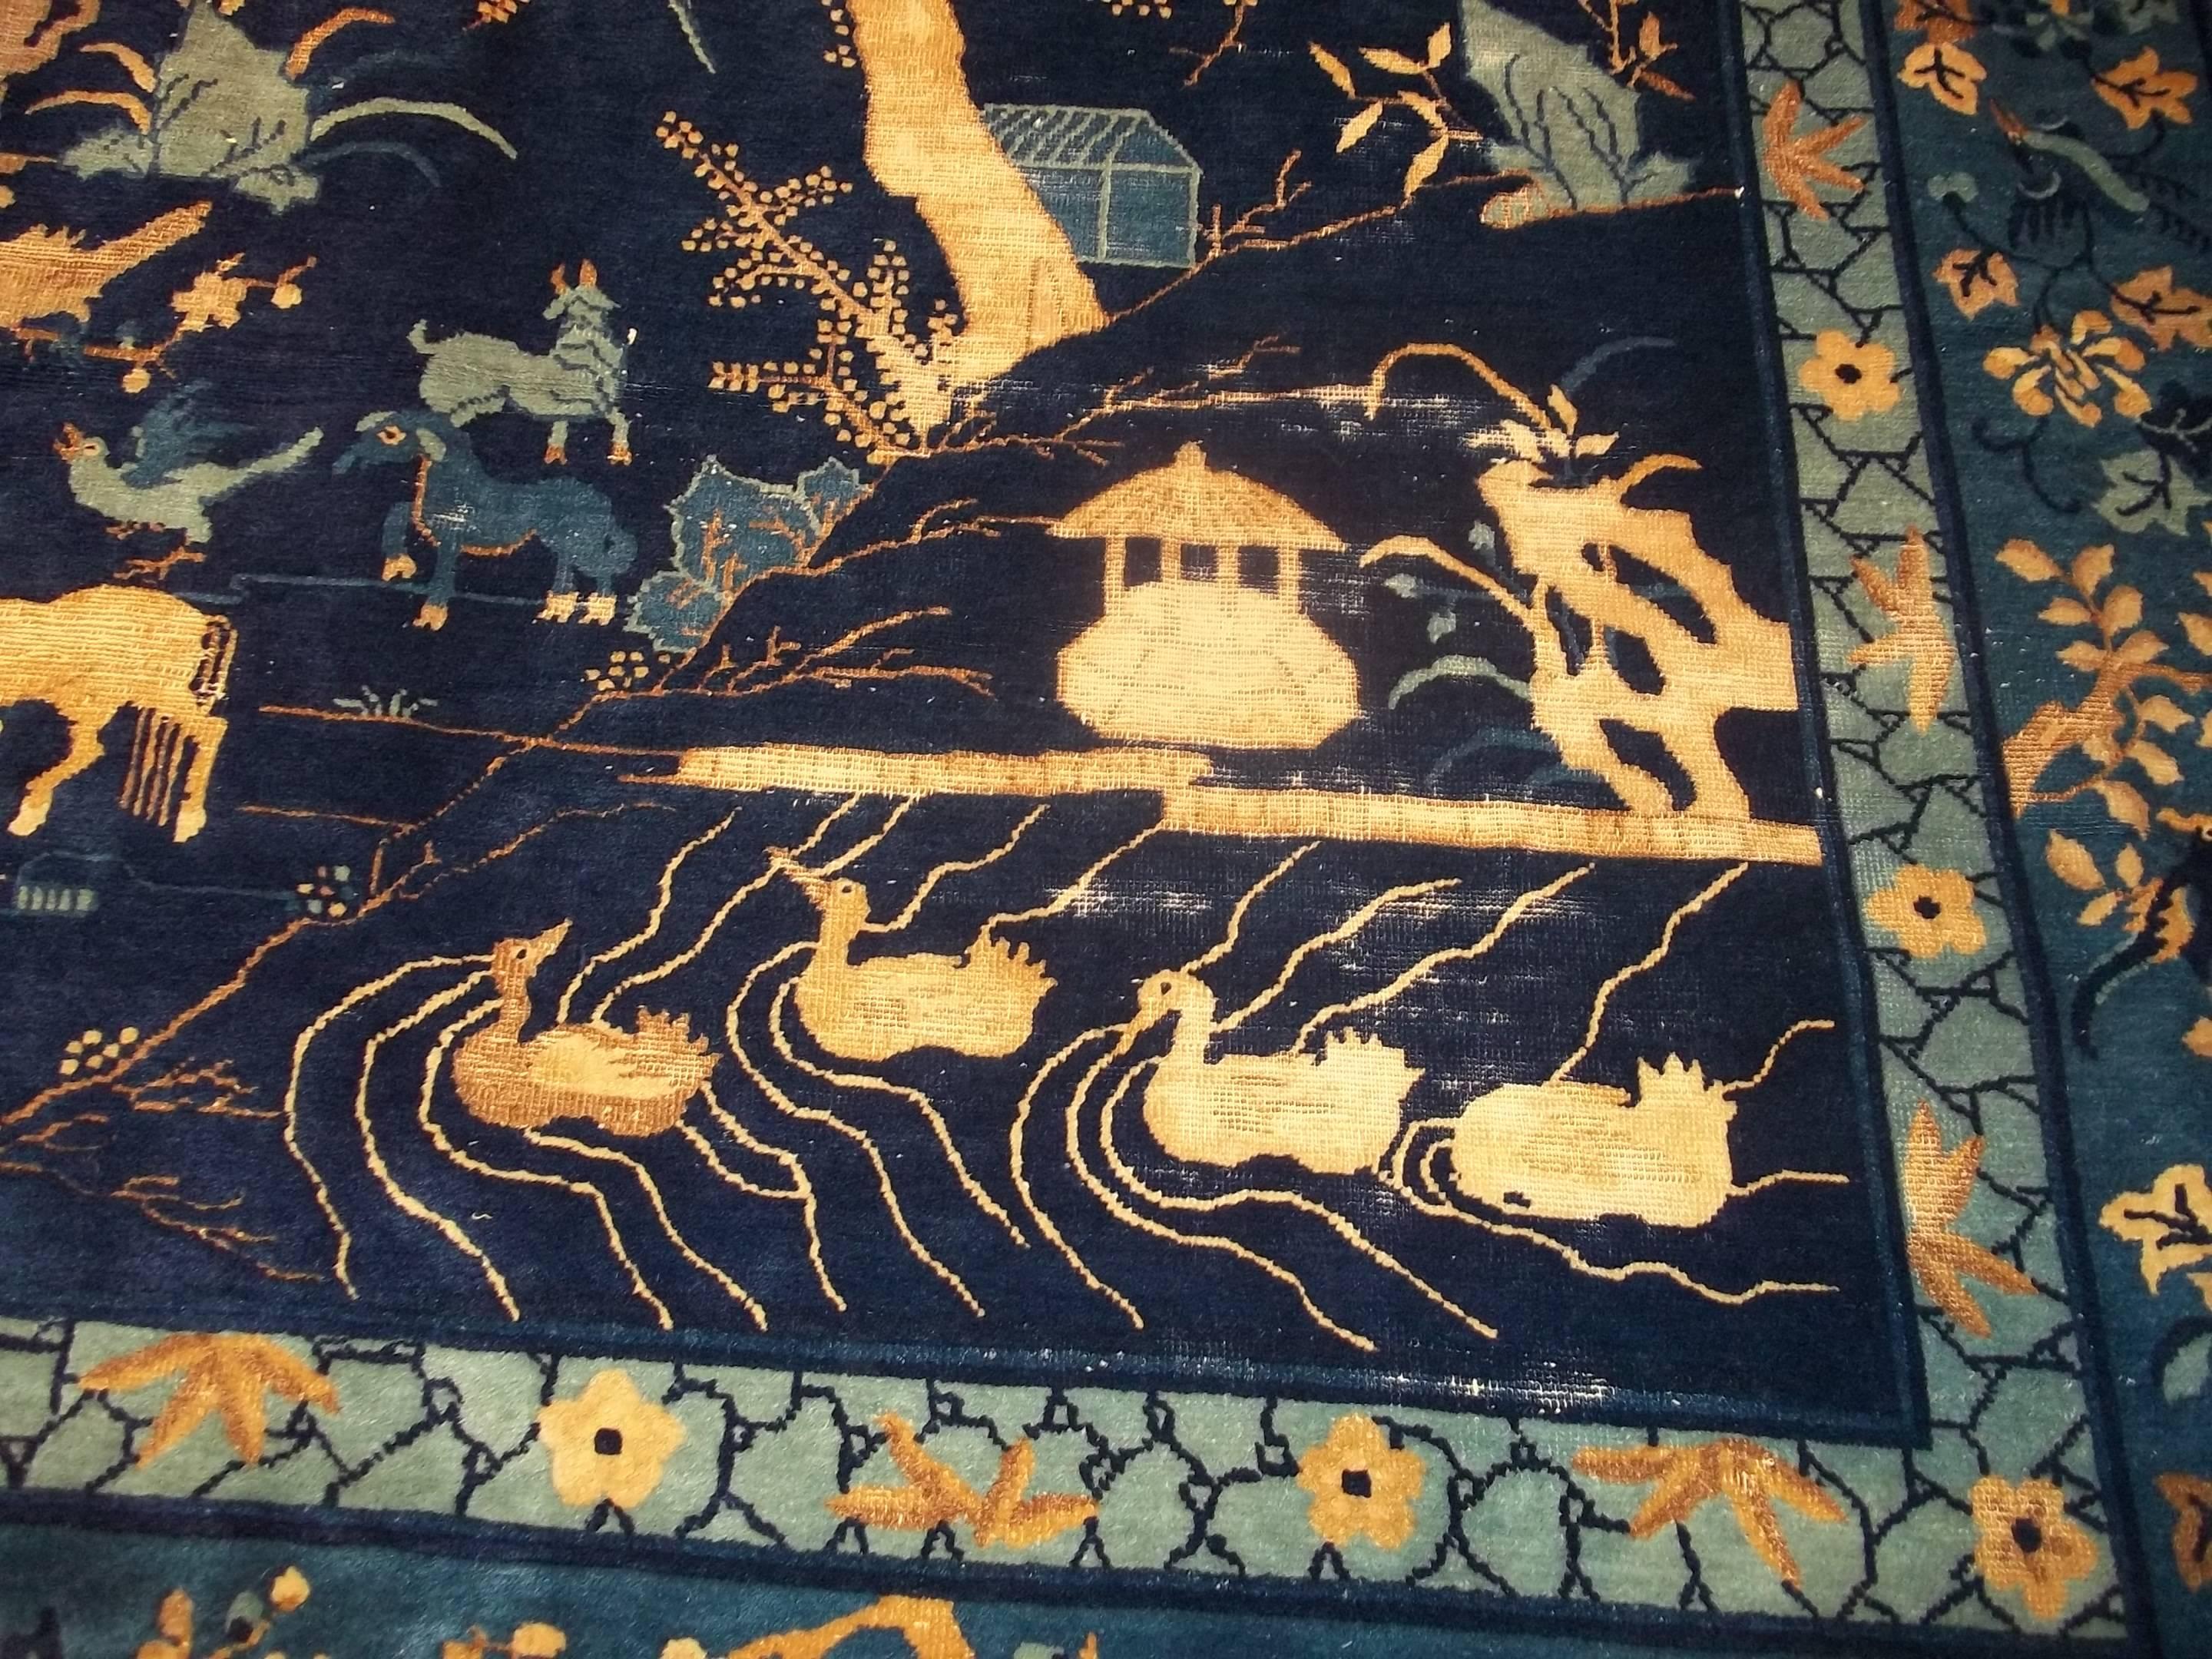 This circa 1880 Peking Chinese rug (INV 6888) measures 12’0” by 14’5” (371 x 441 cm).  It is totally covered in mythological beasts and true animal images.  There are four ducks swimming in a lake.  There is the sacred mountain with a horse grazing